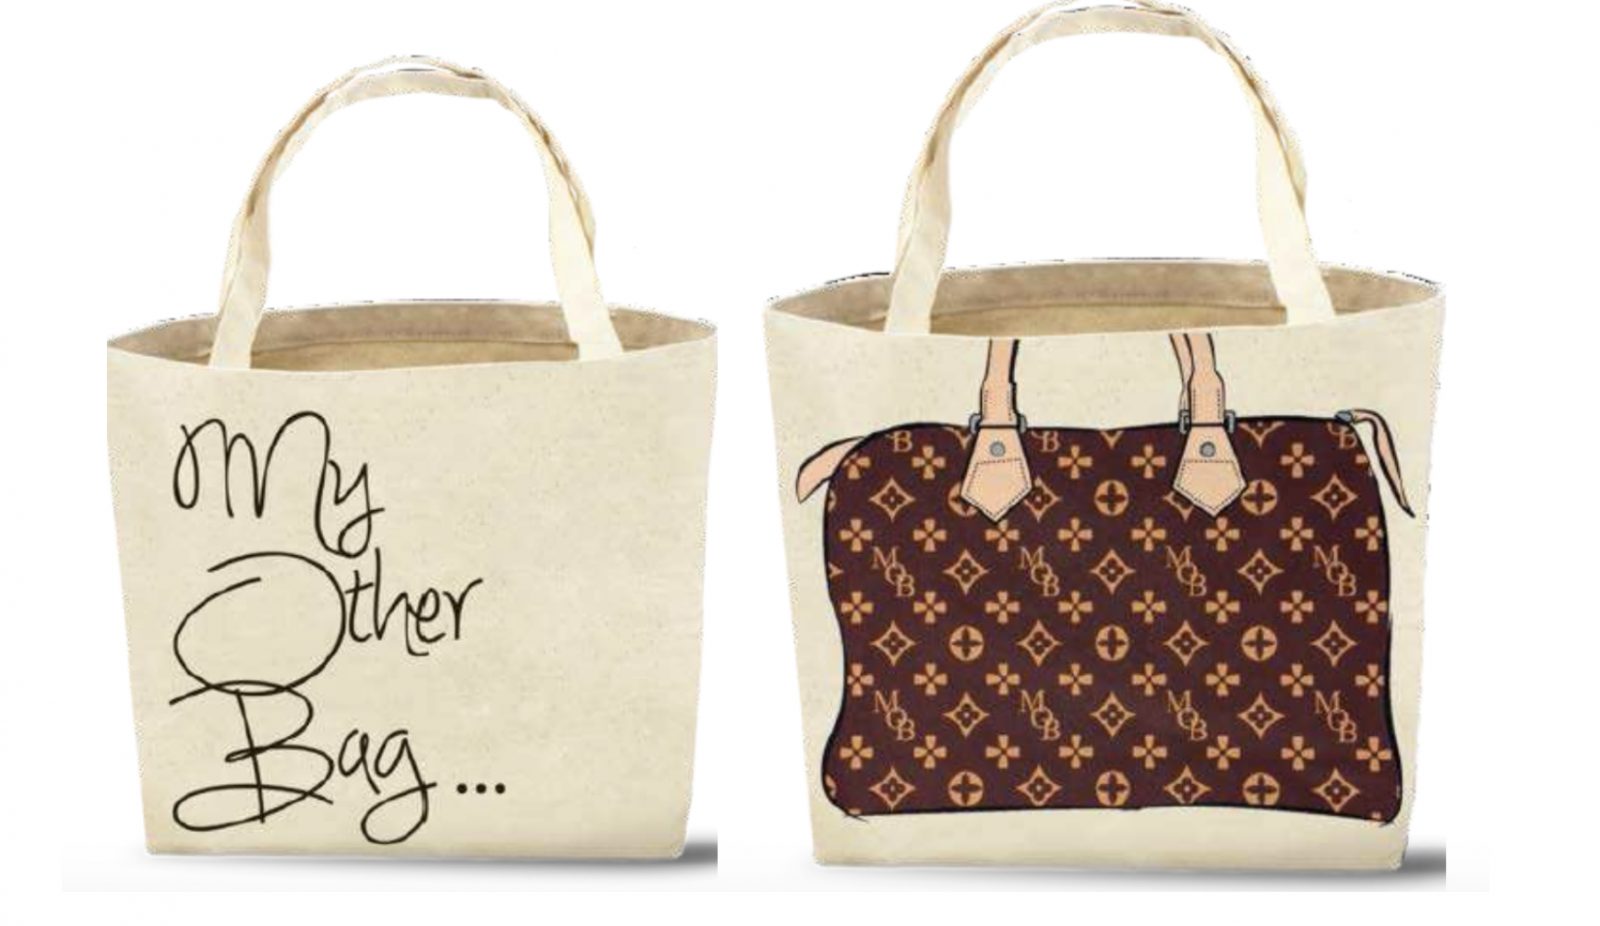 My Other Bag' Appeal Not Looking Promising for Louis Vuitton - The Fashion  Law